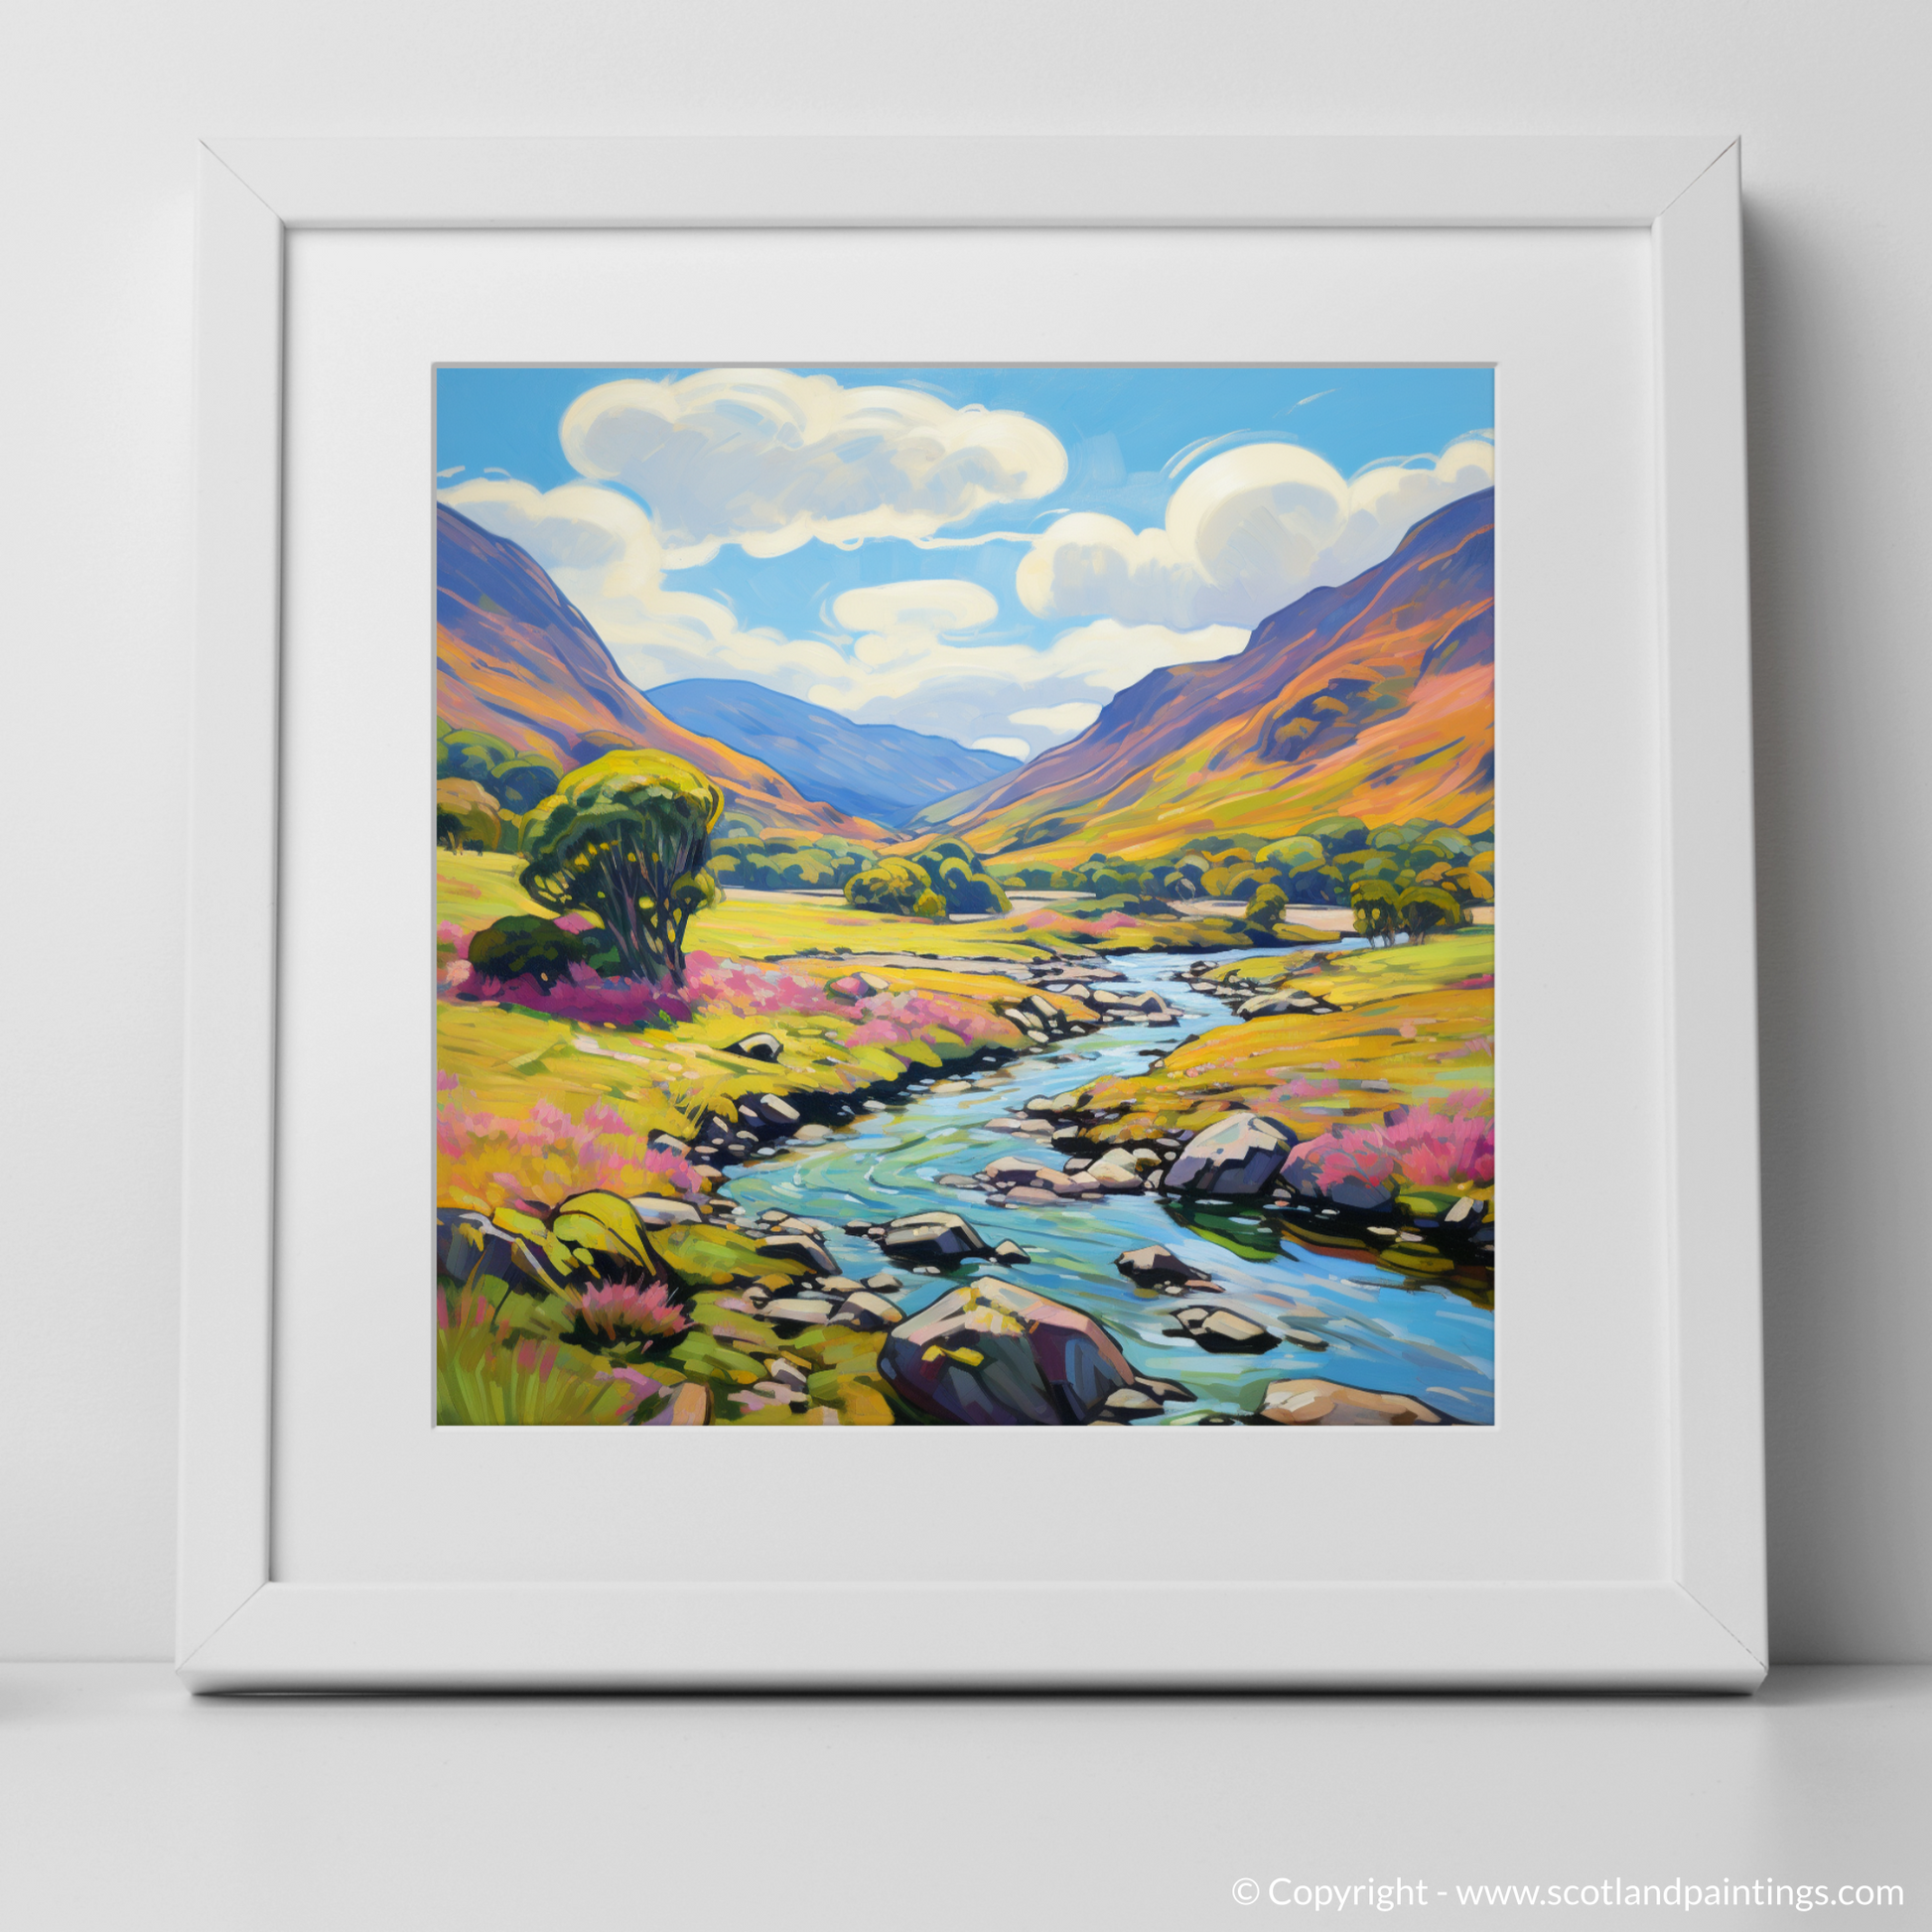 Art Print of Glen Feshie, Highlands in summer with a white frame